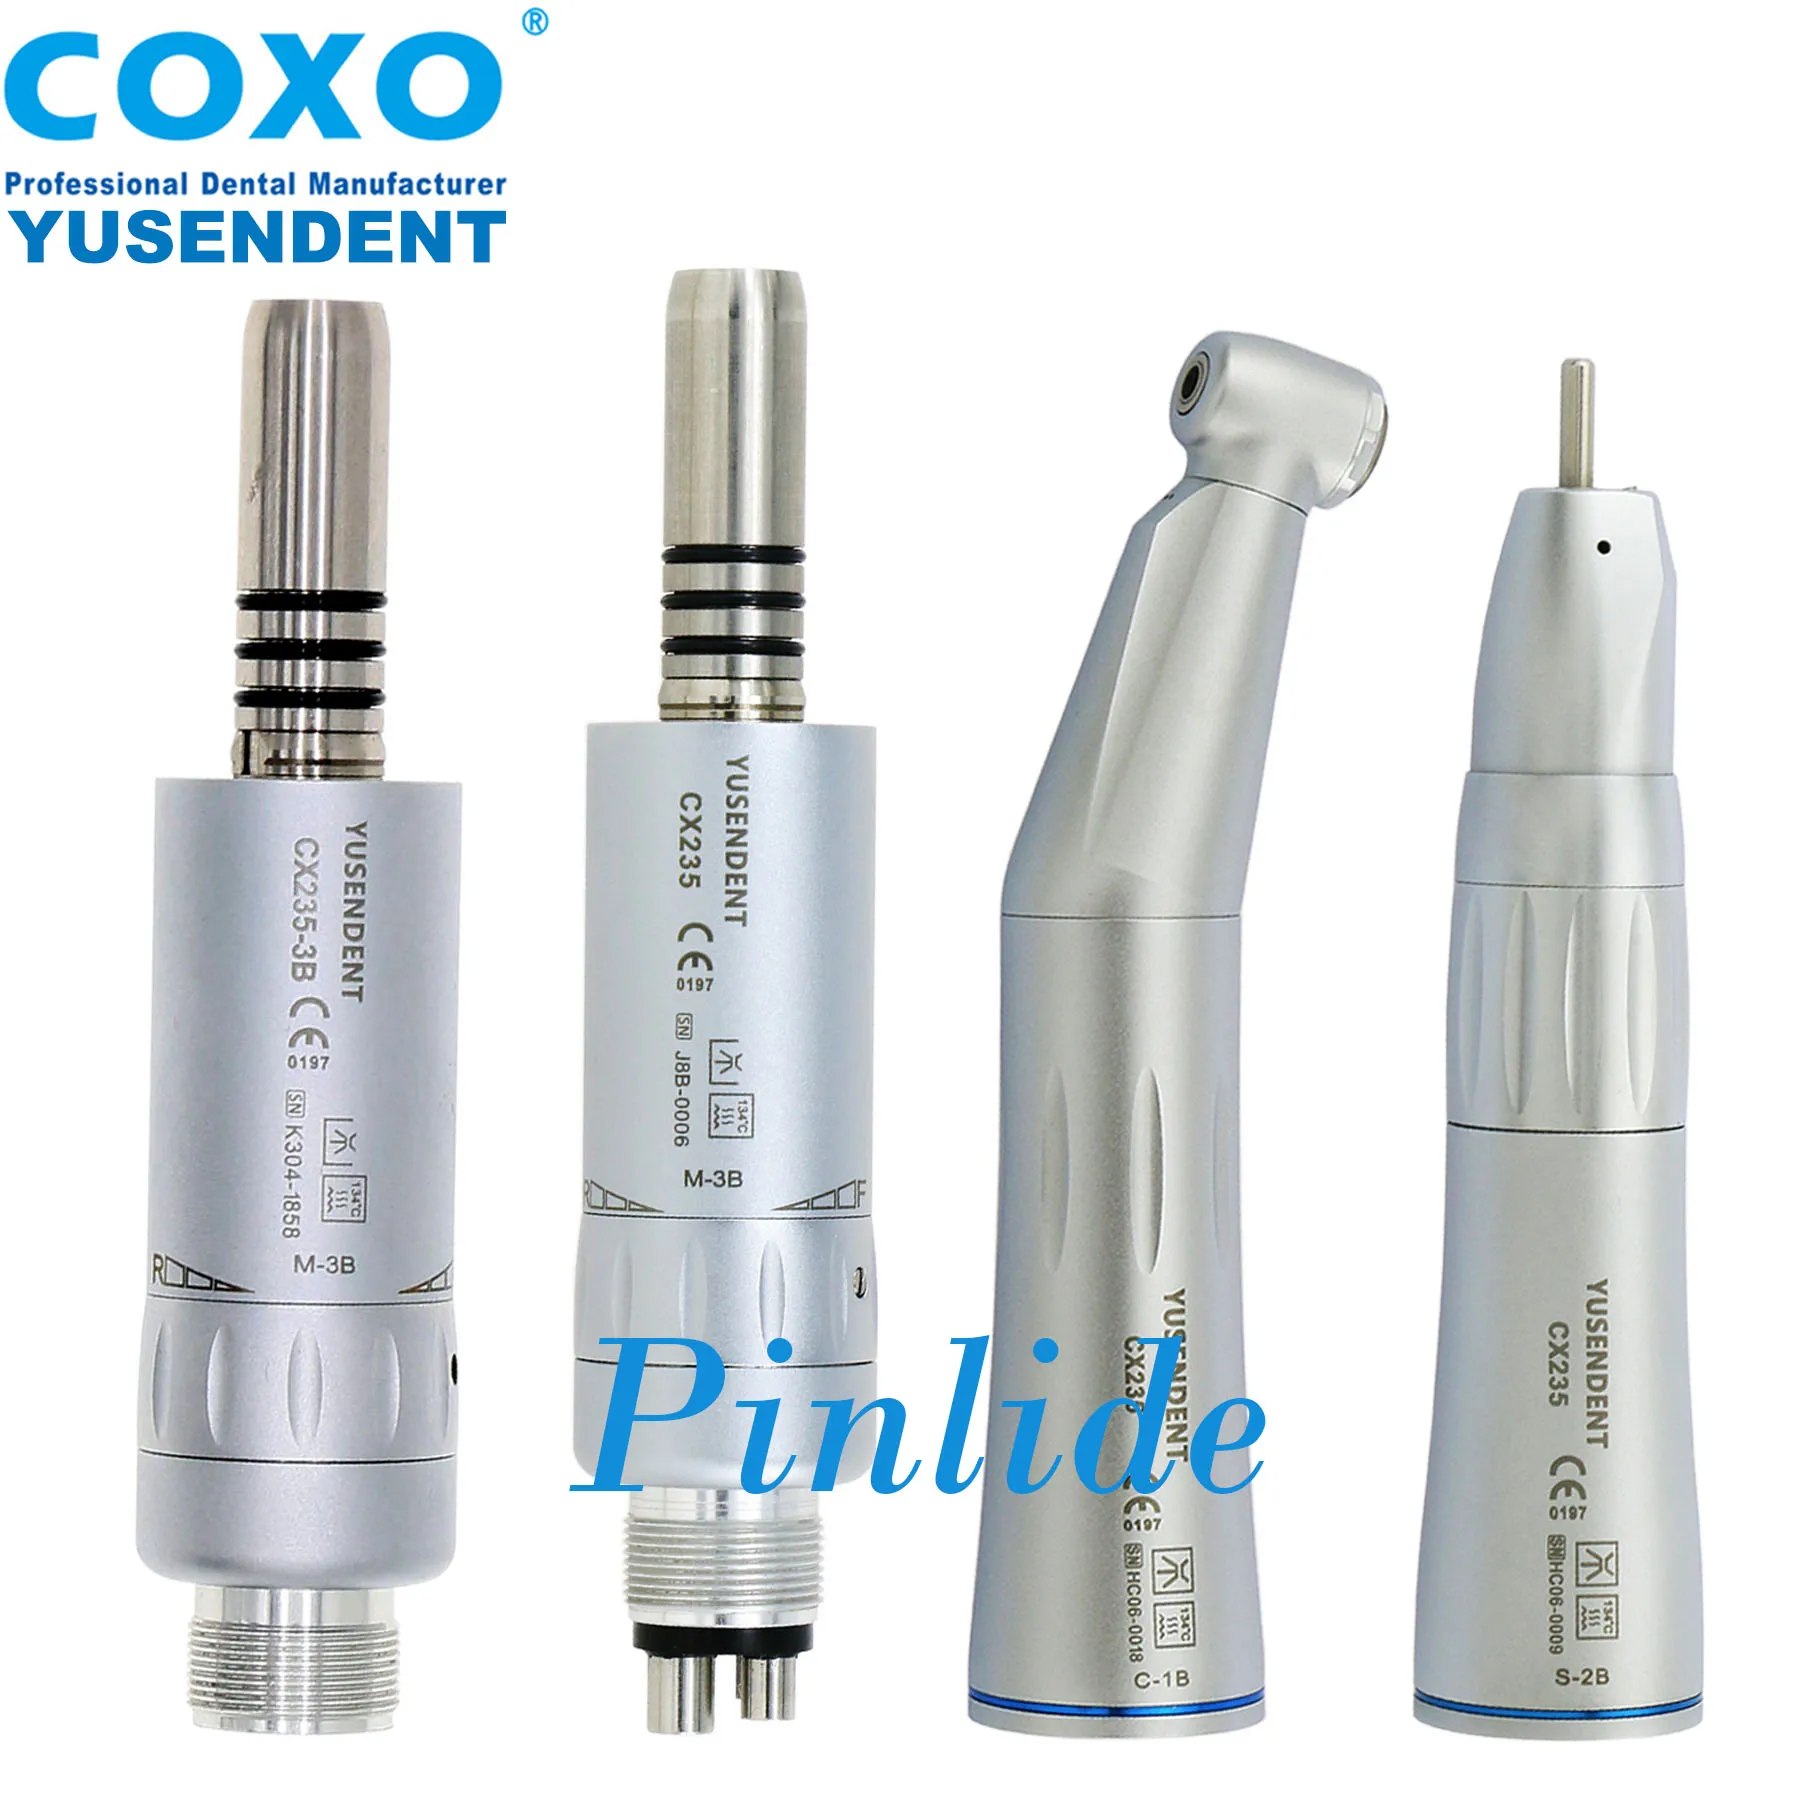 Coxo E Type Low Speed Inner Water Contra Angle Handpiece CX235-1B 